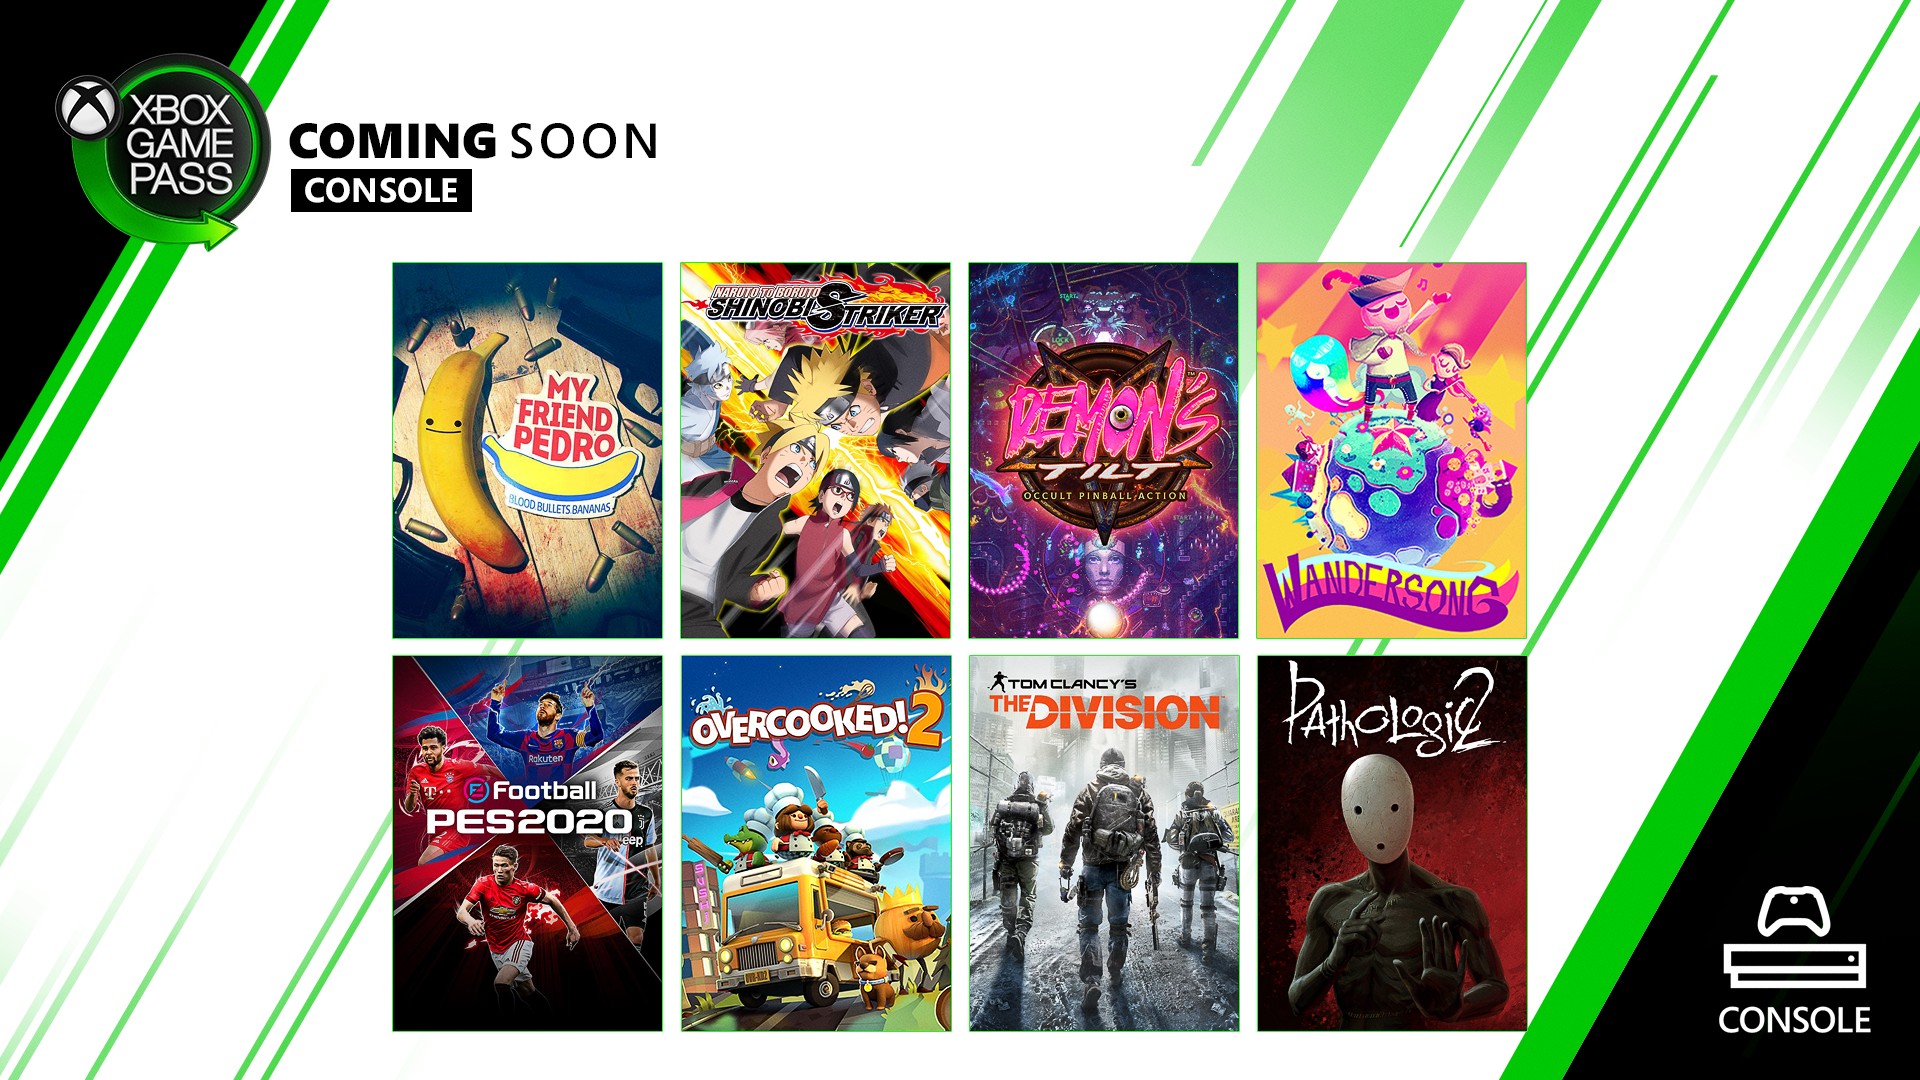 Xbox Game Pass - Console - December 2019